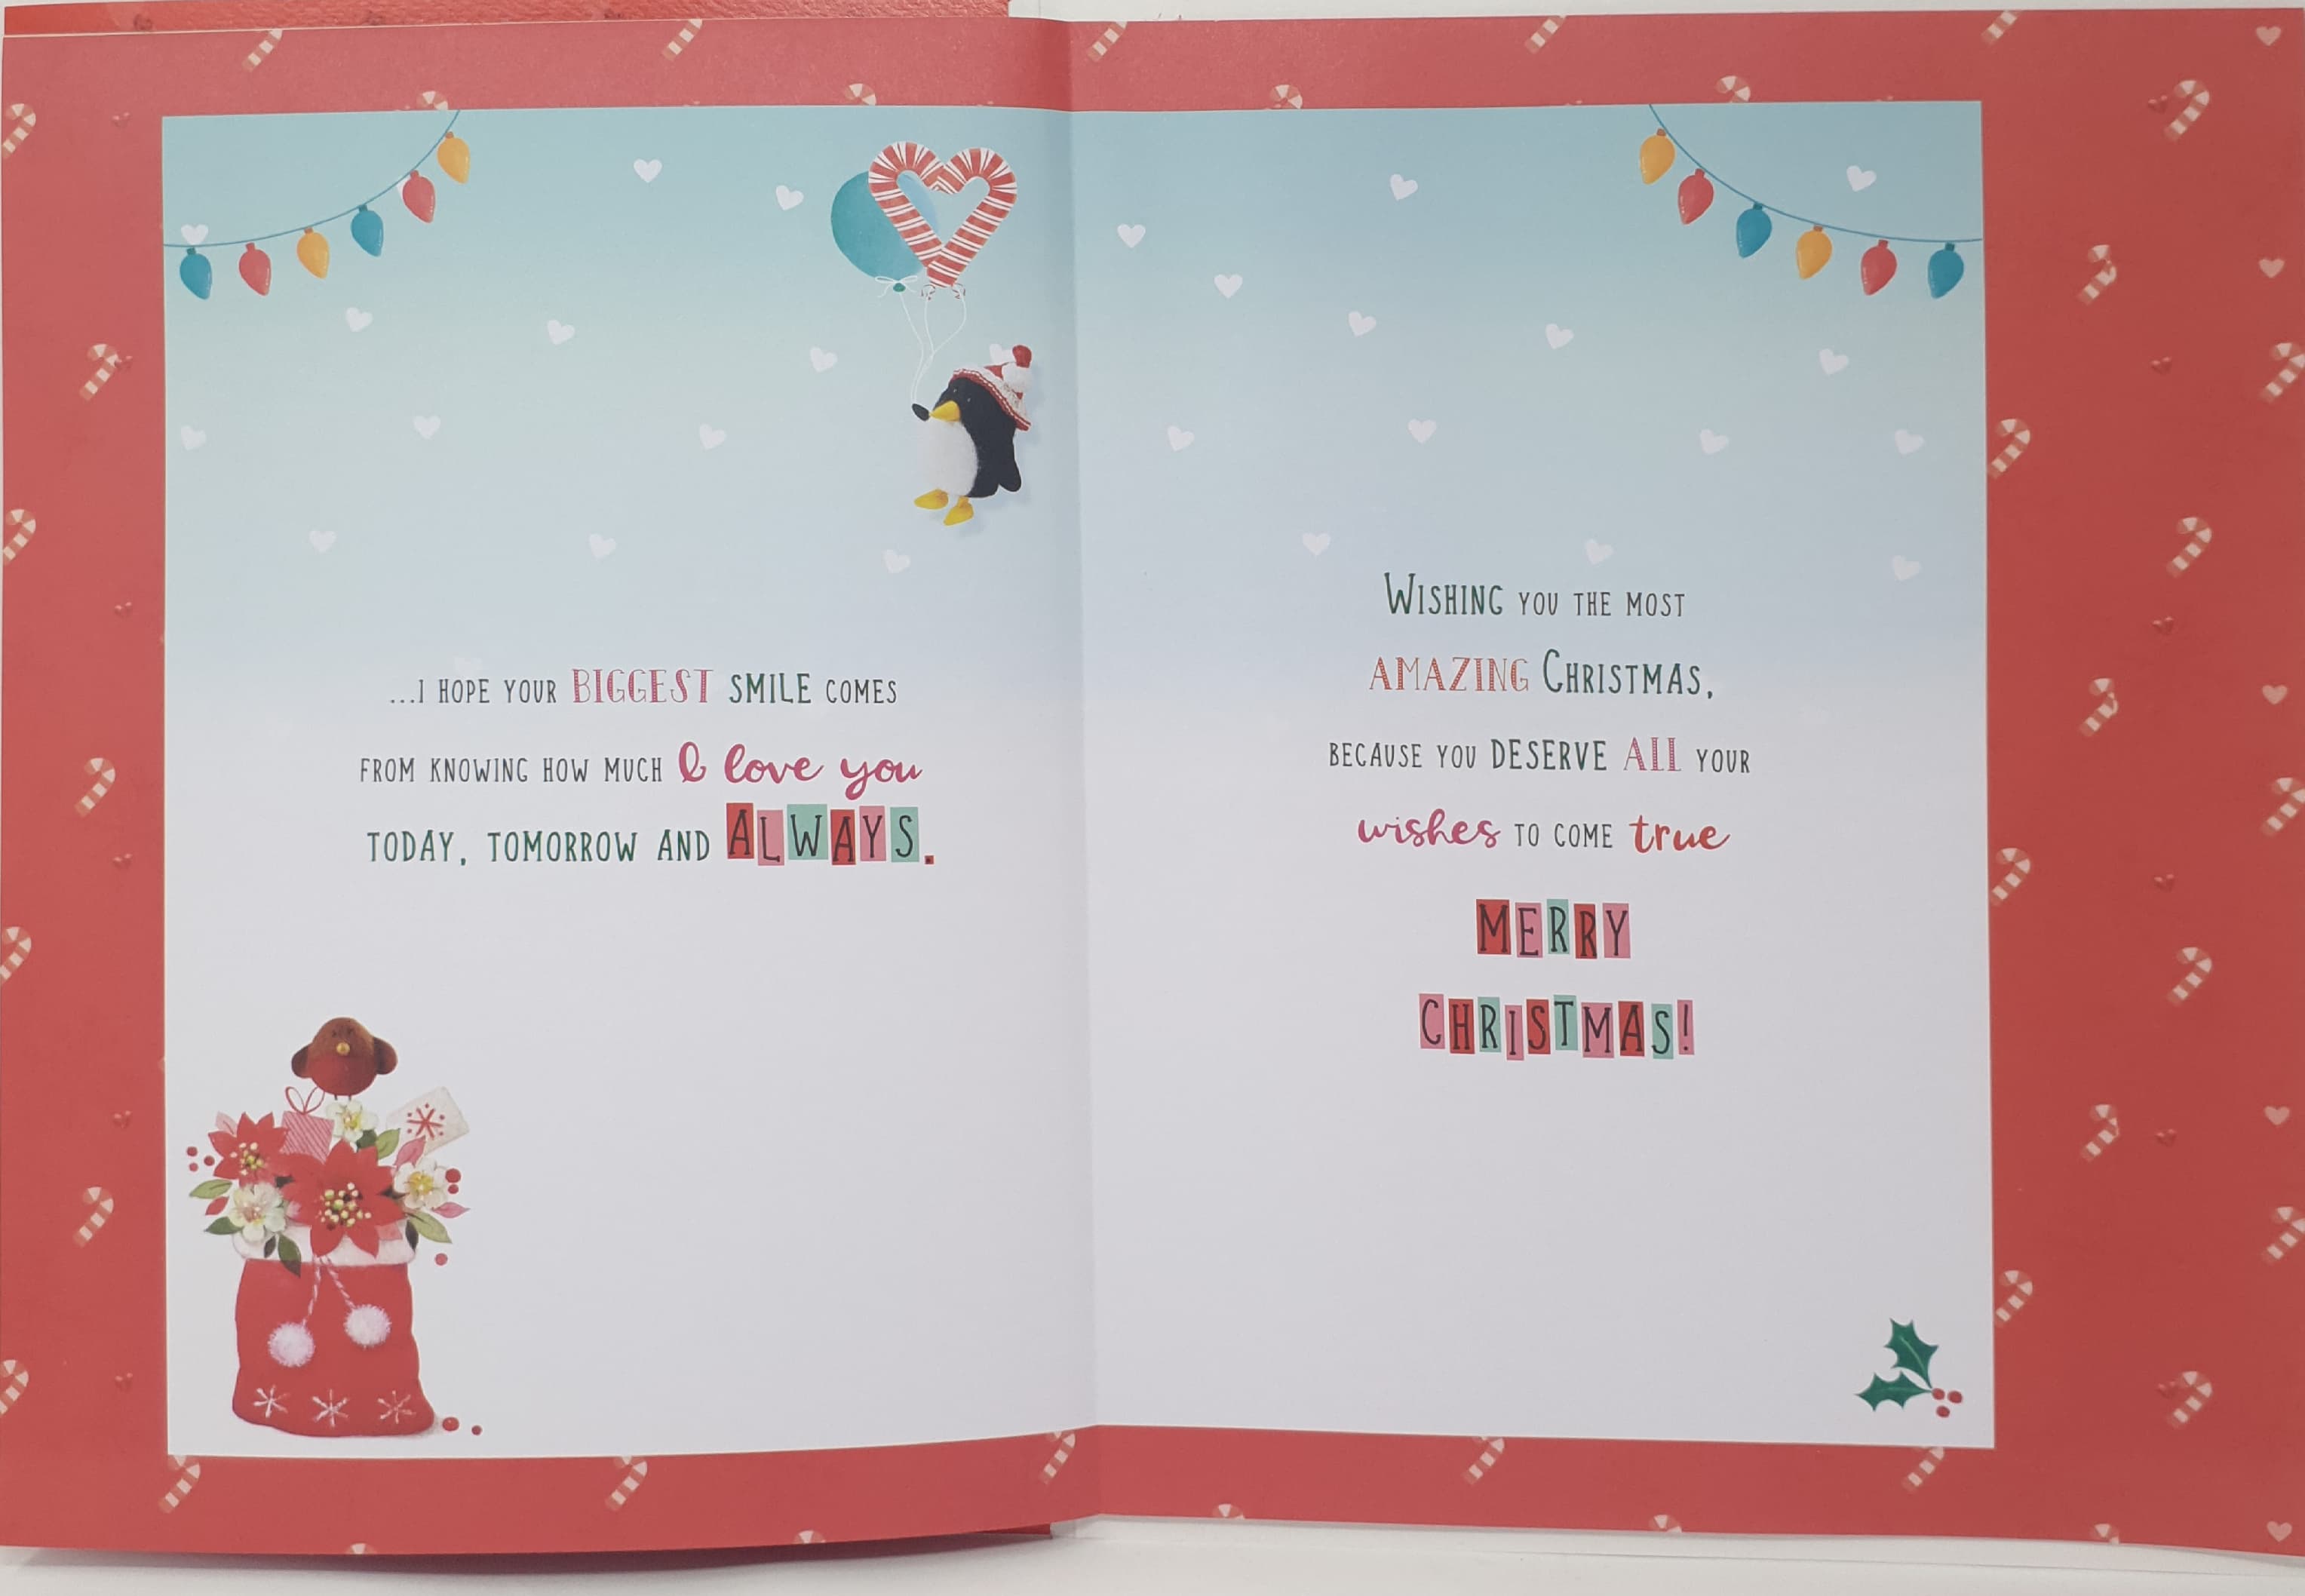 Wife Christmas Card - Two Teddy Bears with Gifts & Hearts (Card In A Presentation Box)